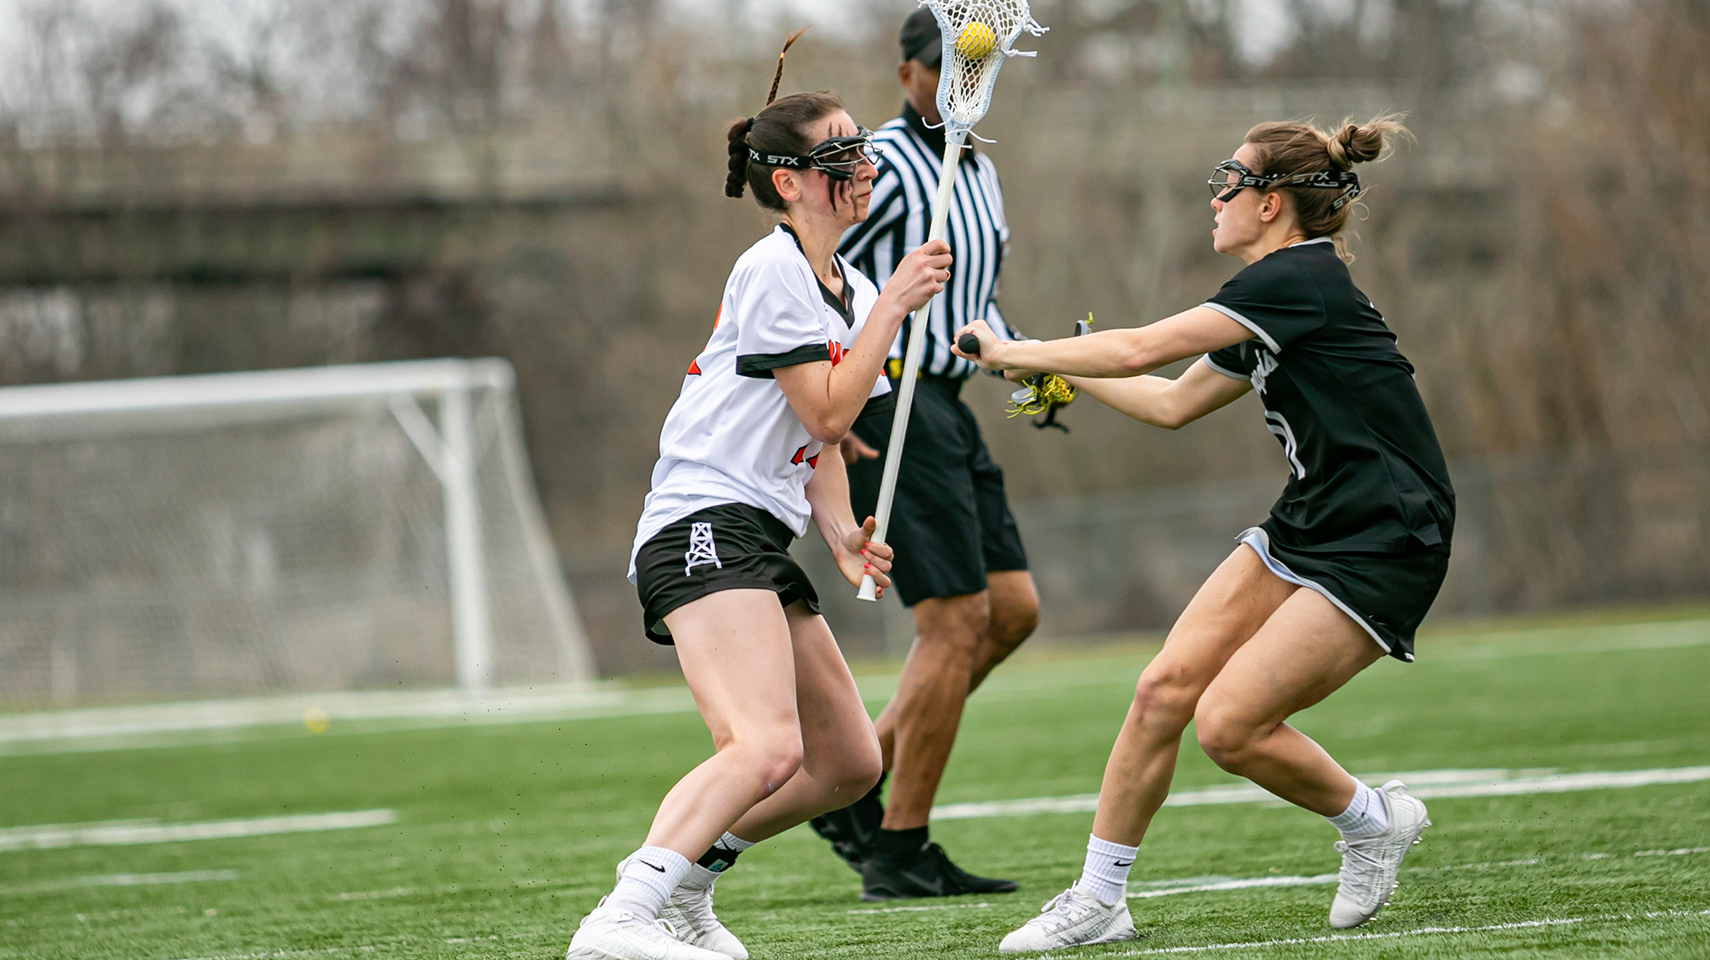 Women's lacrosse player standing up and changing directions